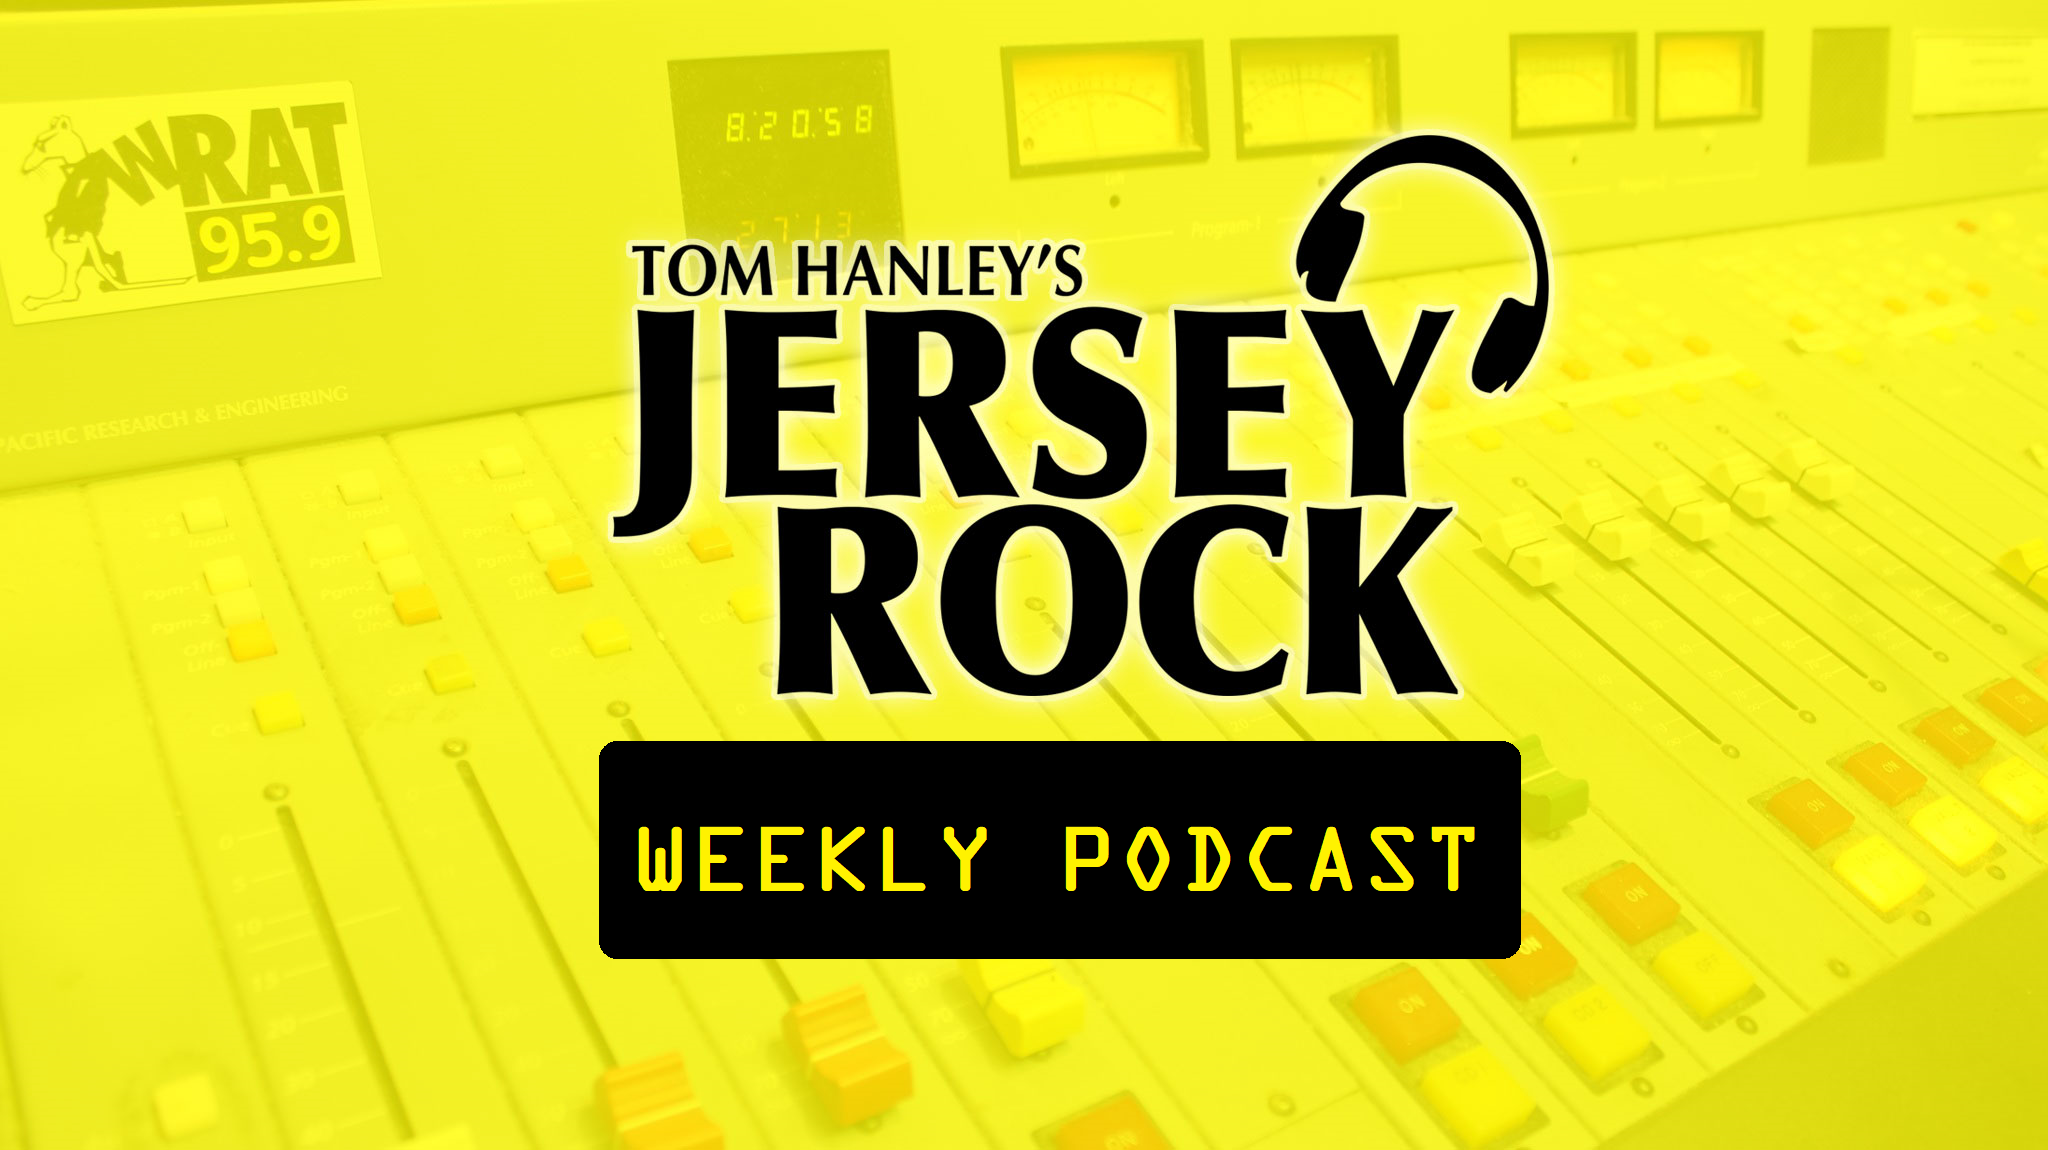 Jersey Rock Weekly Podcast Episode 305